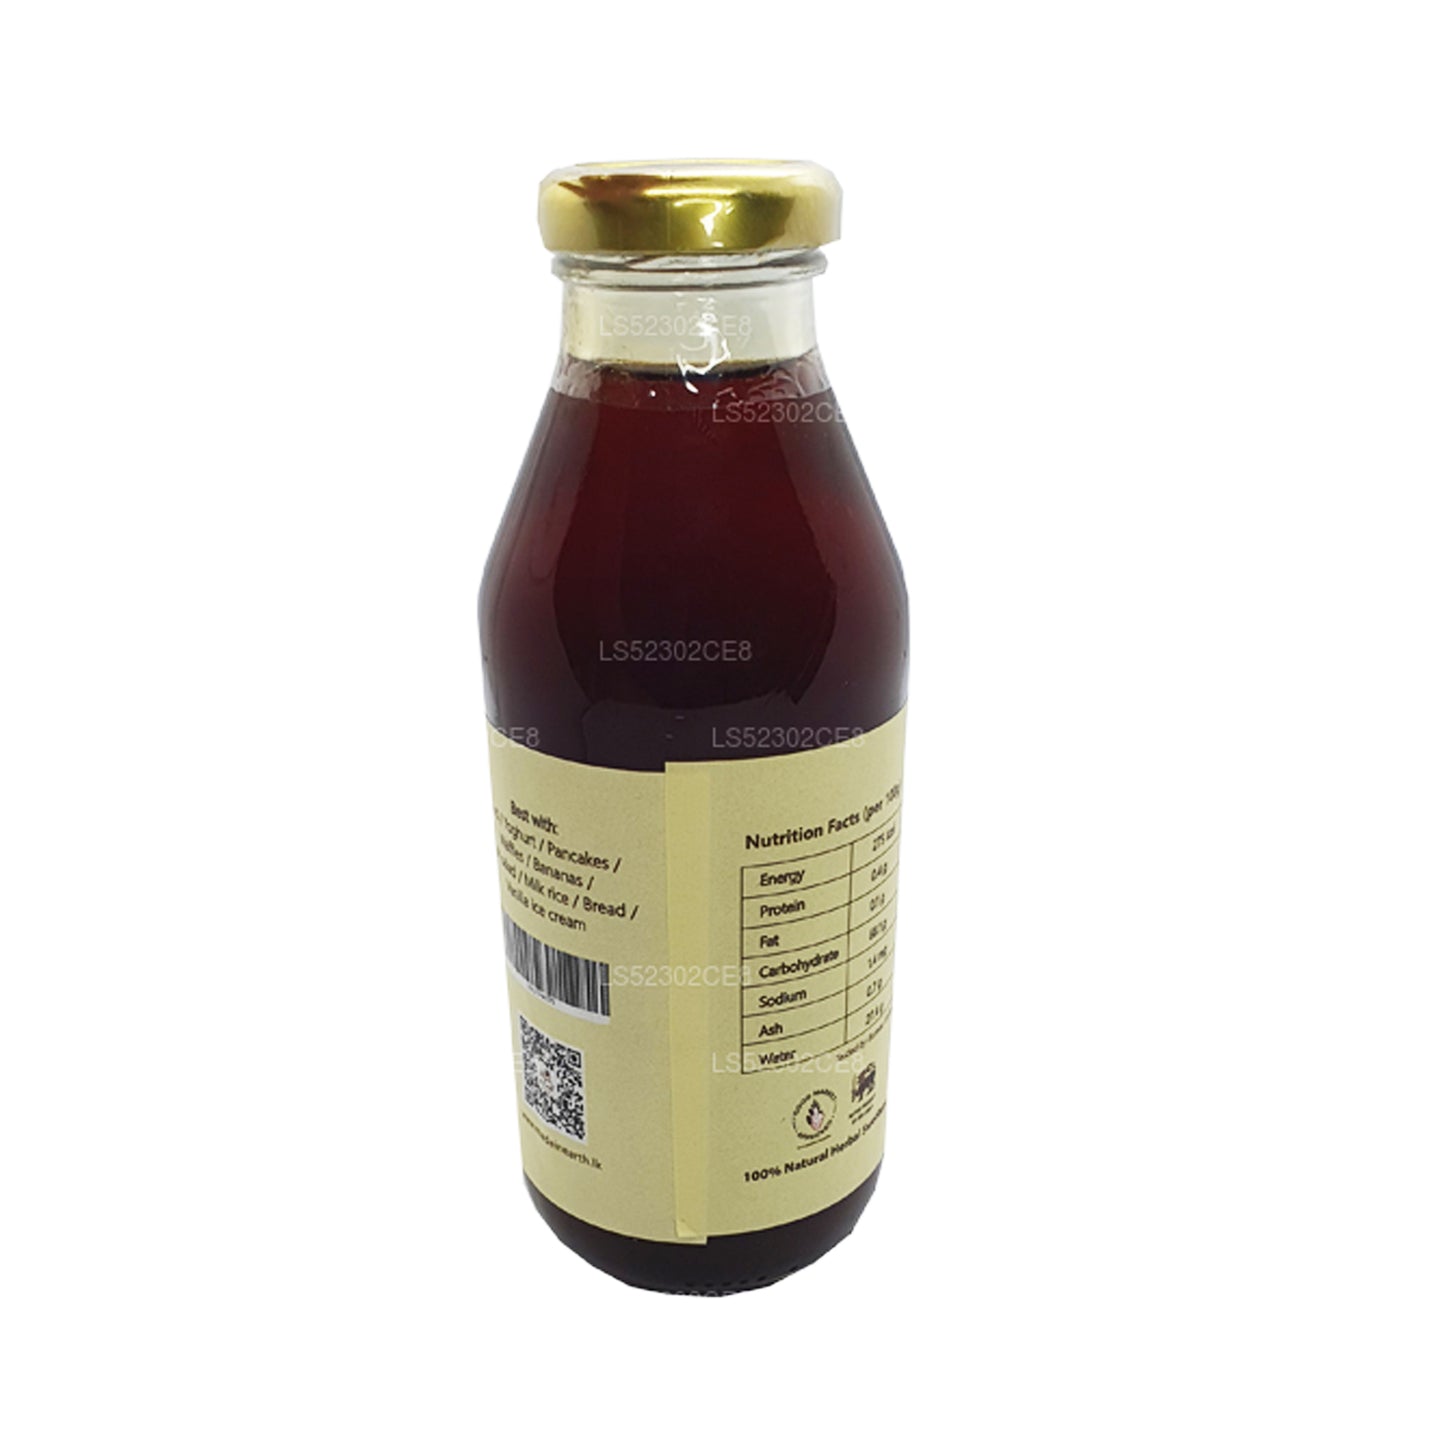 Made In Earth Pure Natural Kithul Melacle (375 ml)